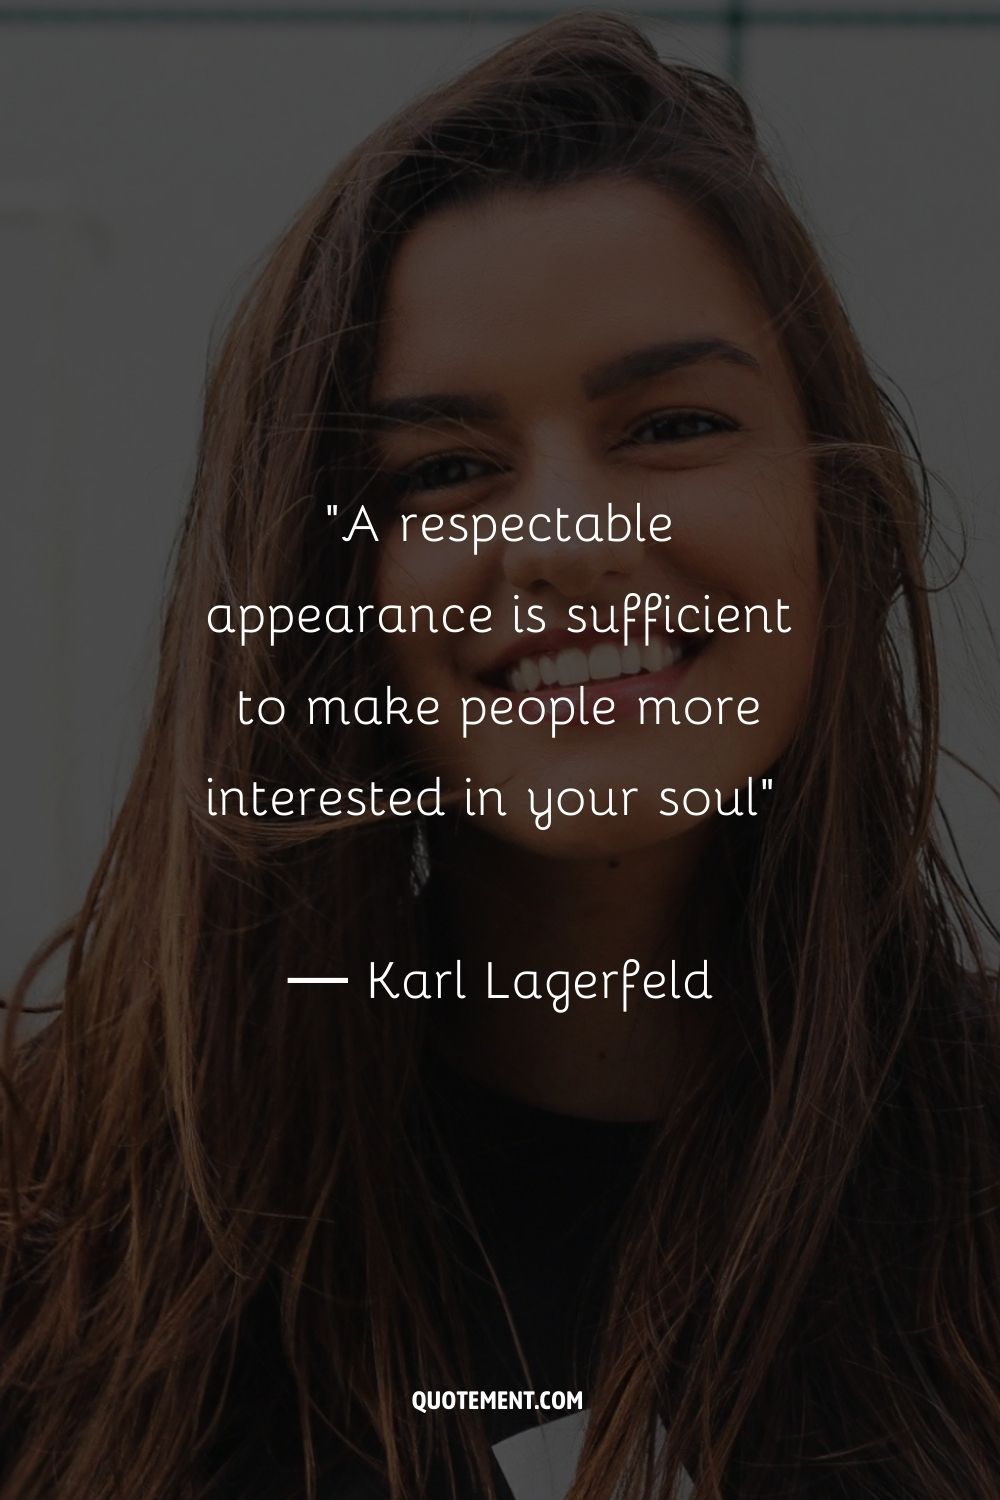 A respectable appearance is sufficient to make people more interested in your soul